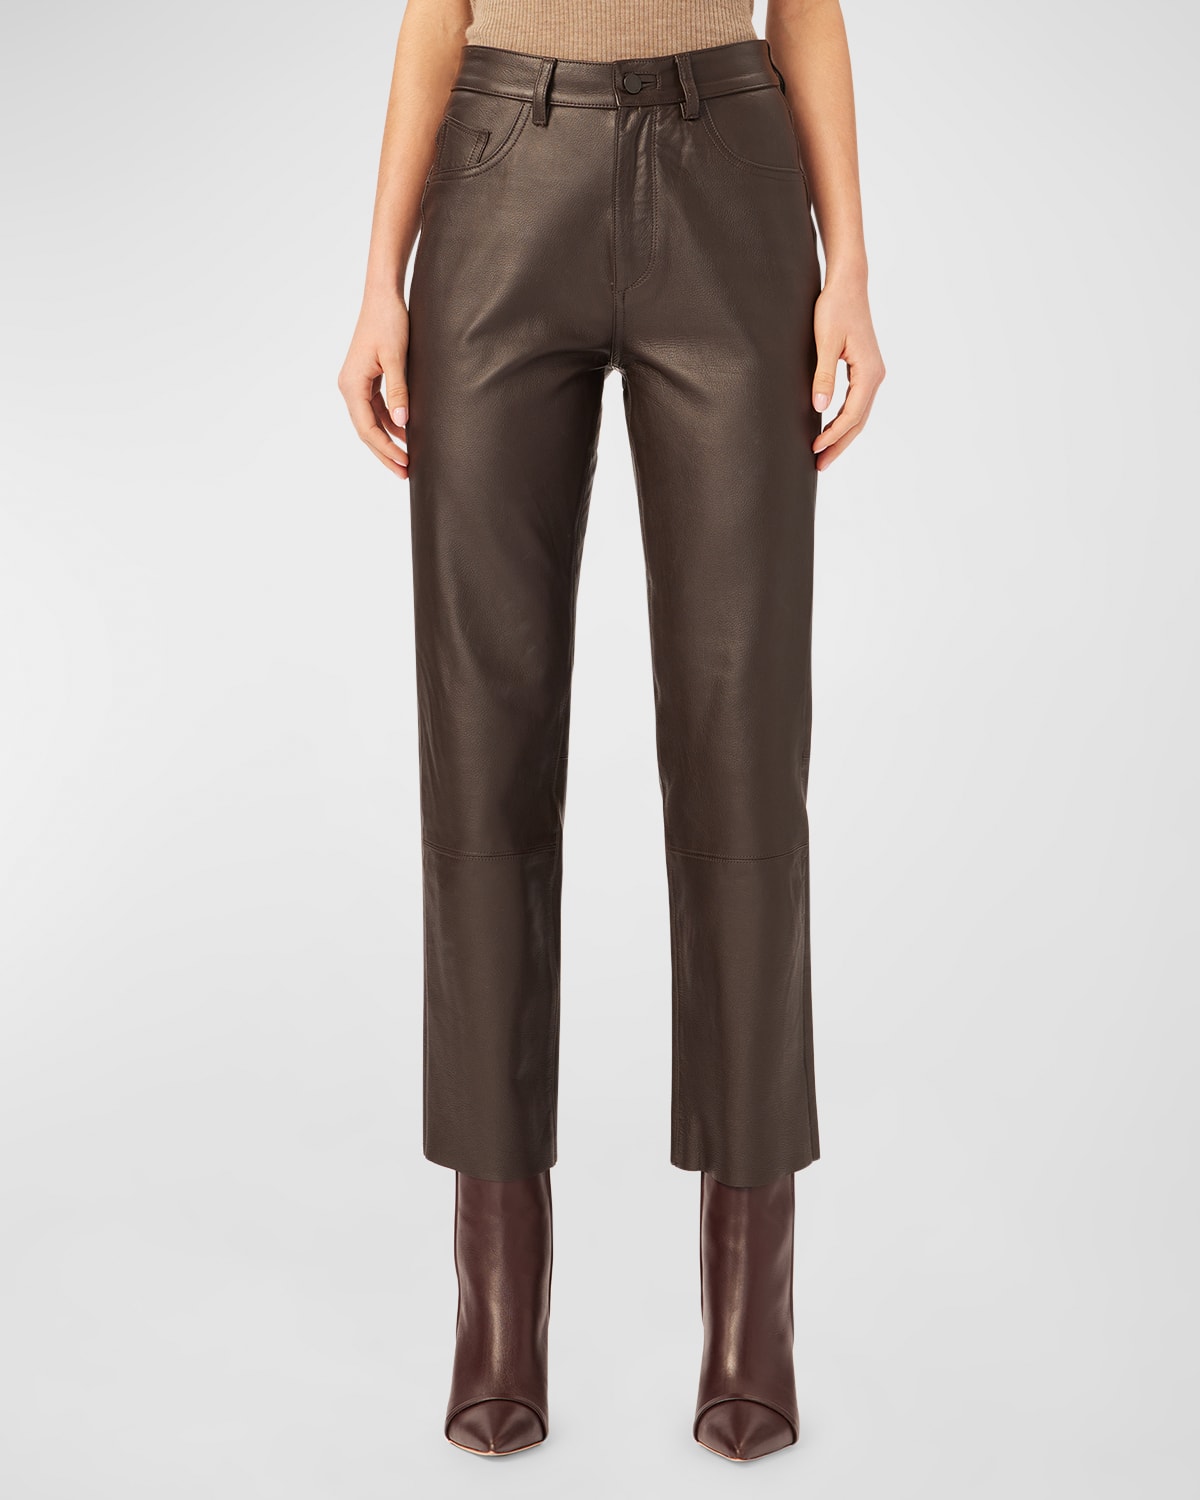 DL1961 PATTI STRAIGHT HIGH RISE VINTAGE LEATHER ANKLE PANTS